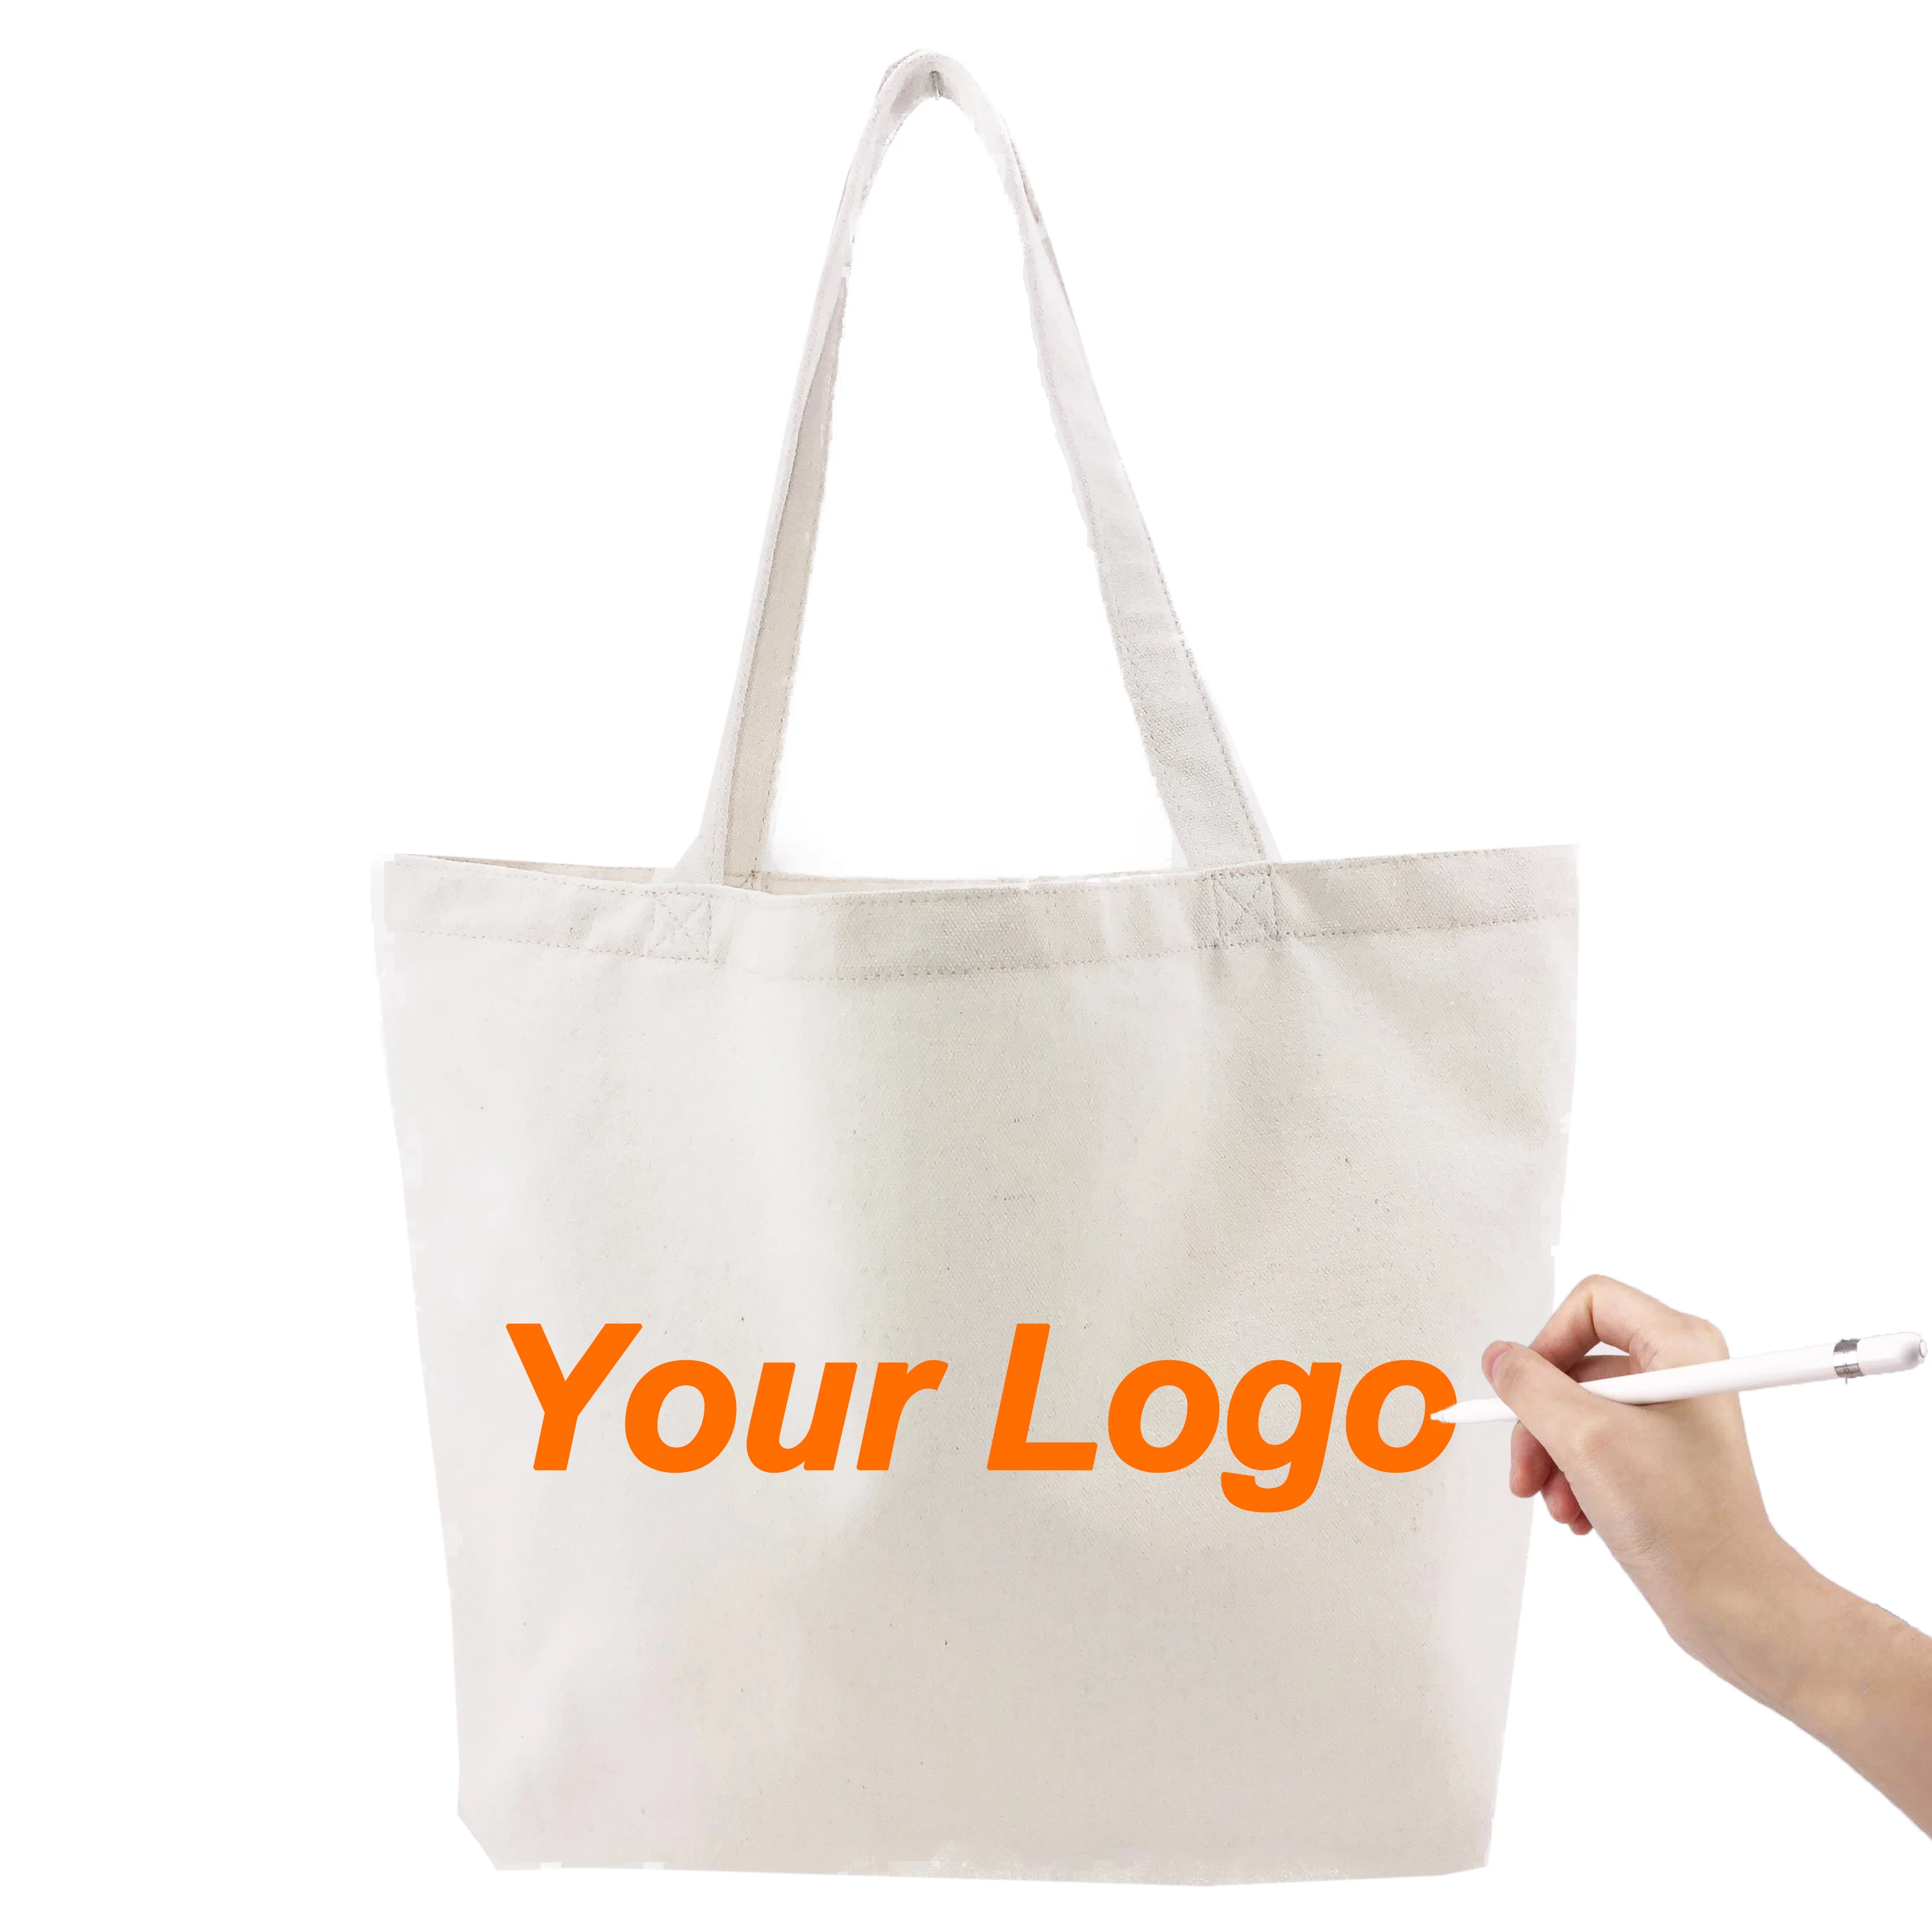 Promotional Custom Tote Bags No Minimum Reusable Grocery Bags For Shopping - Buy Promotional ...